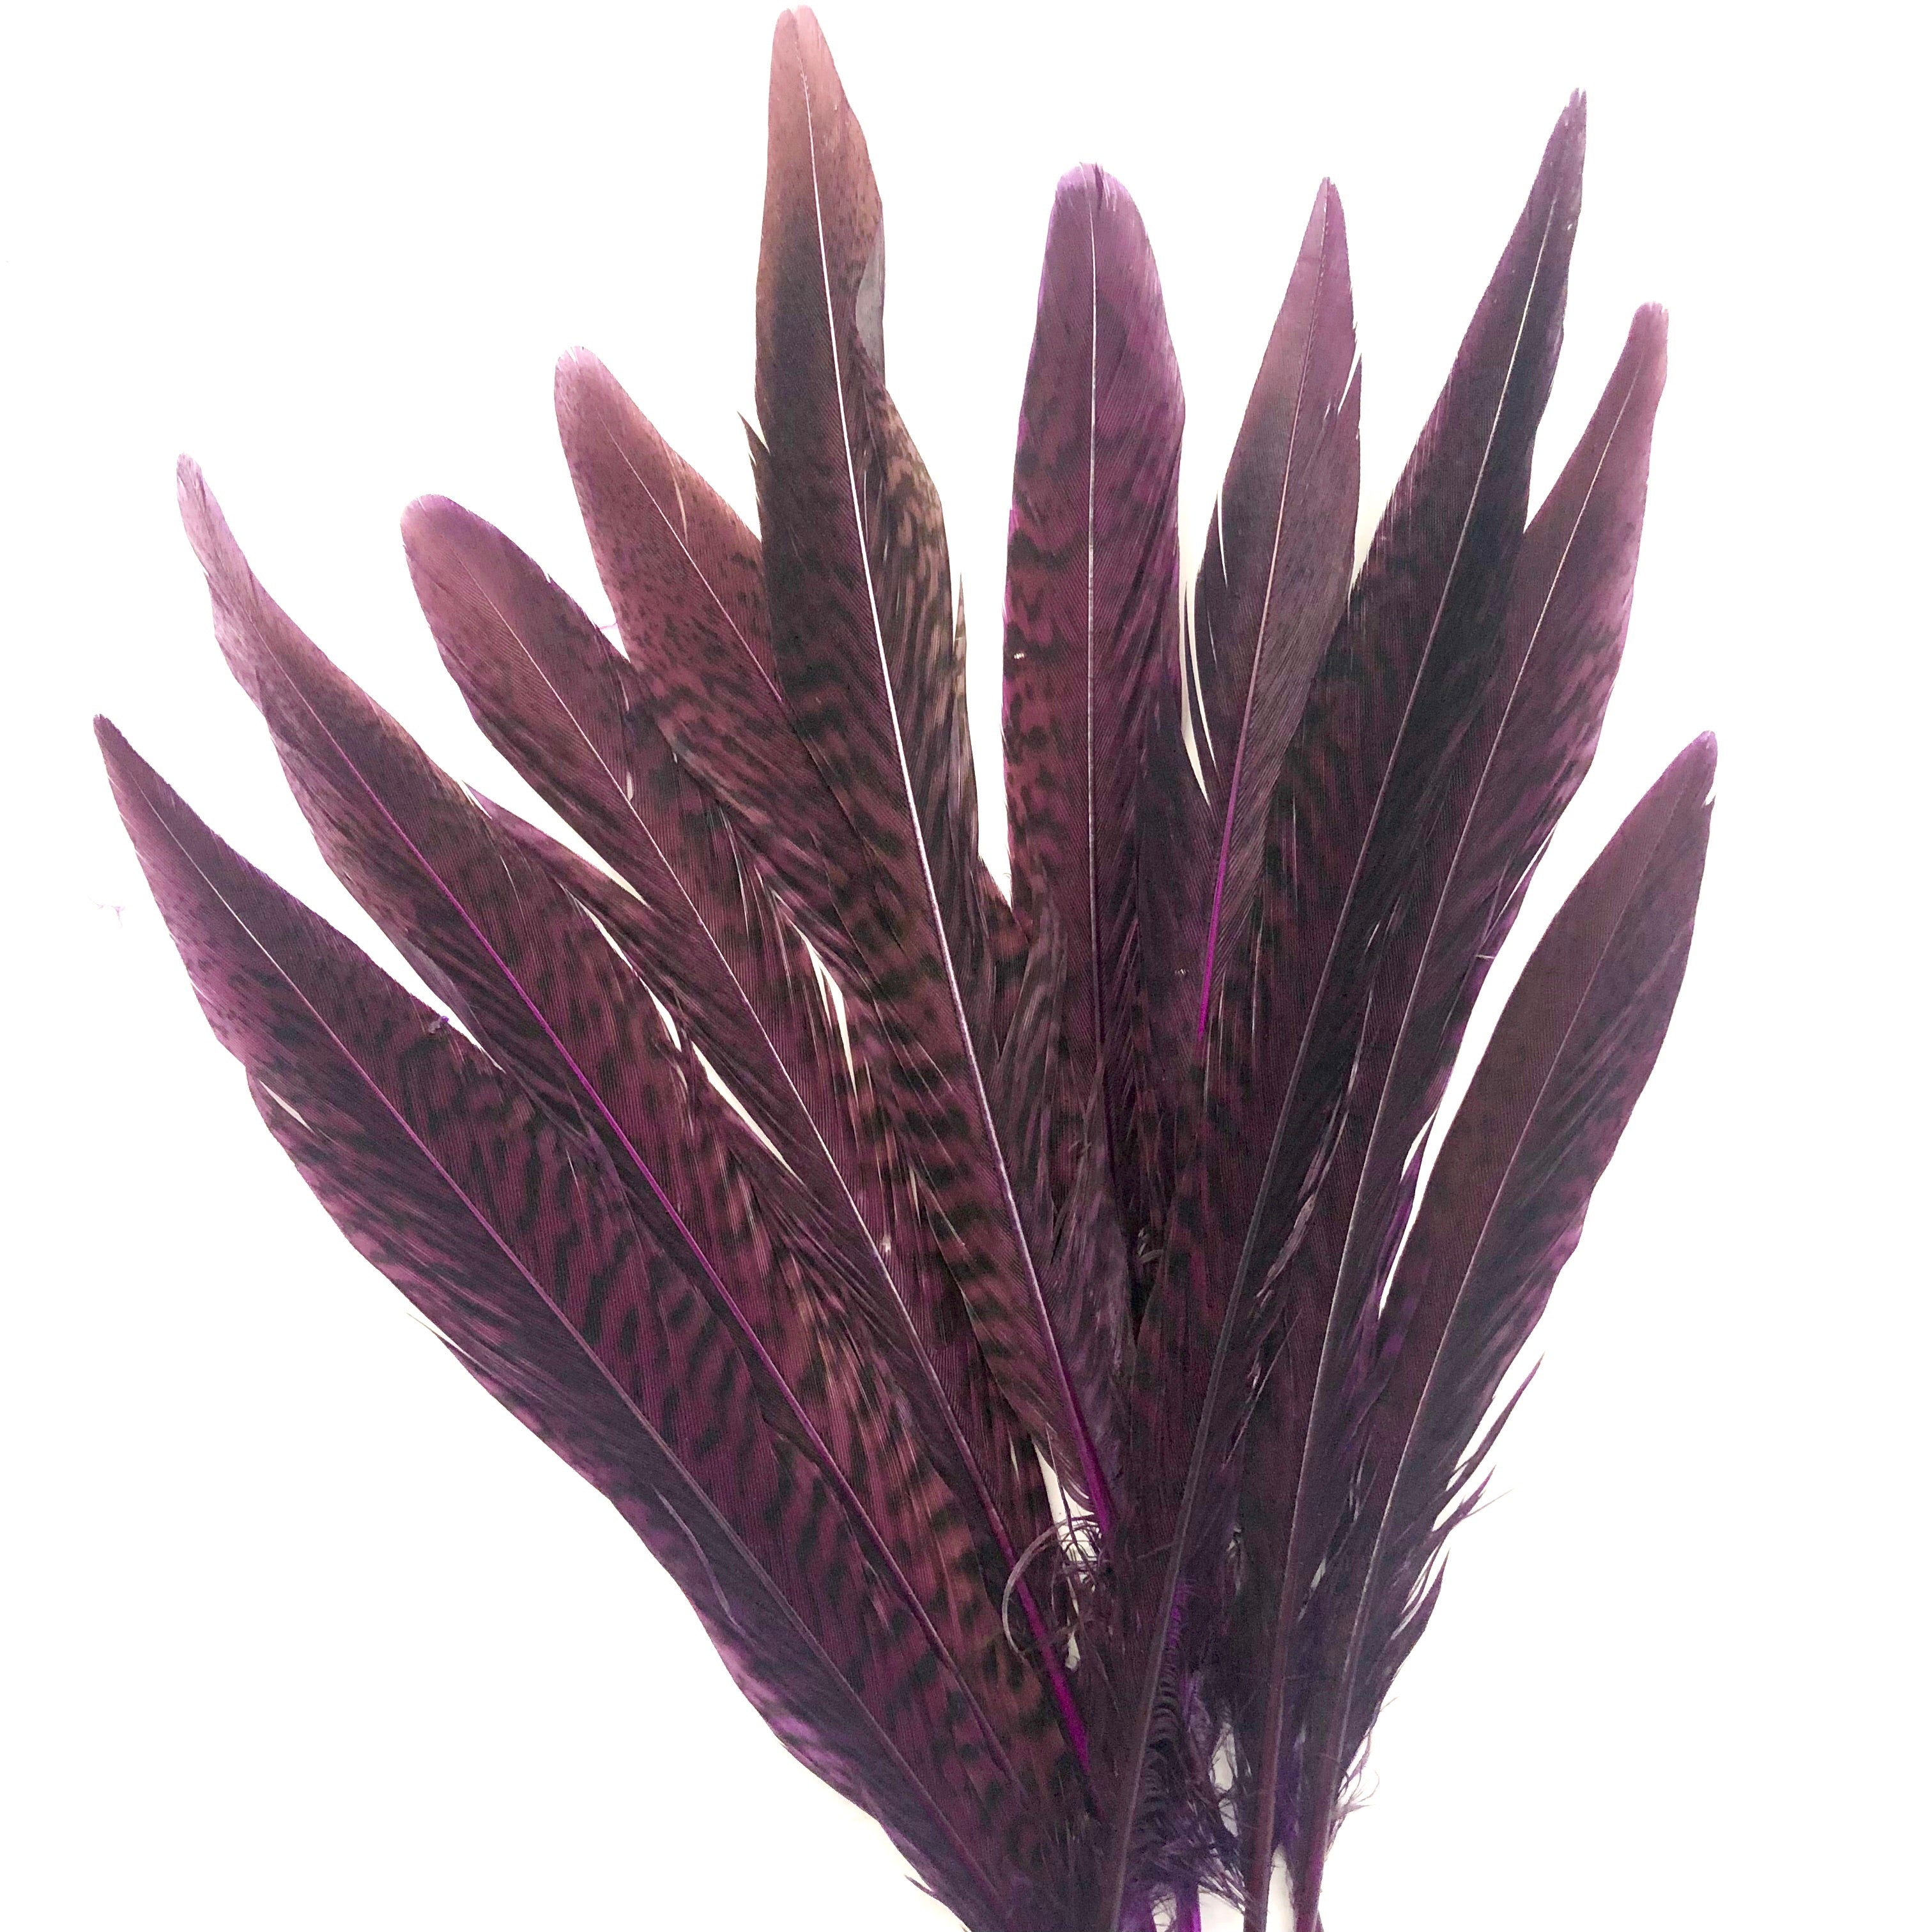 6" to 10" Golden Pheasant Side Tail Feather x 10 pcs - Eggplant